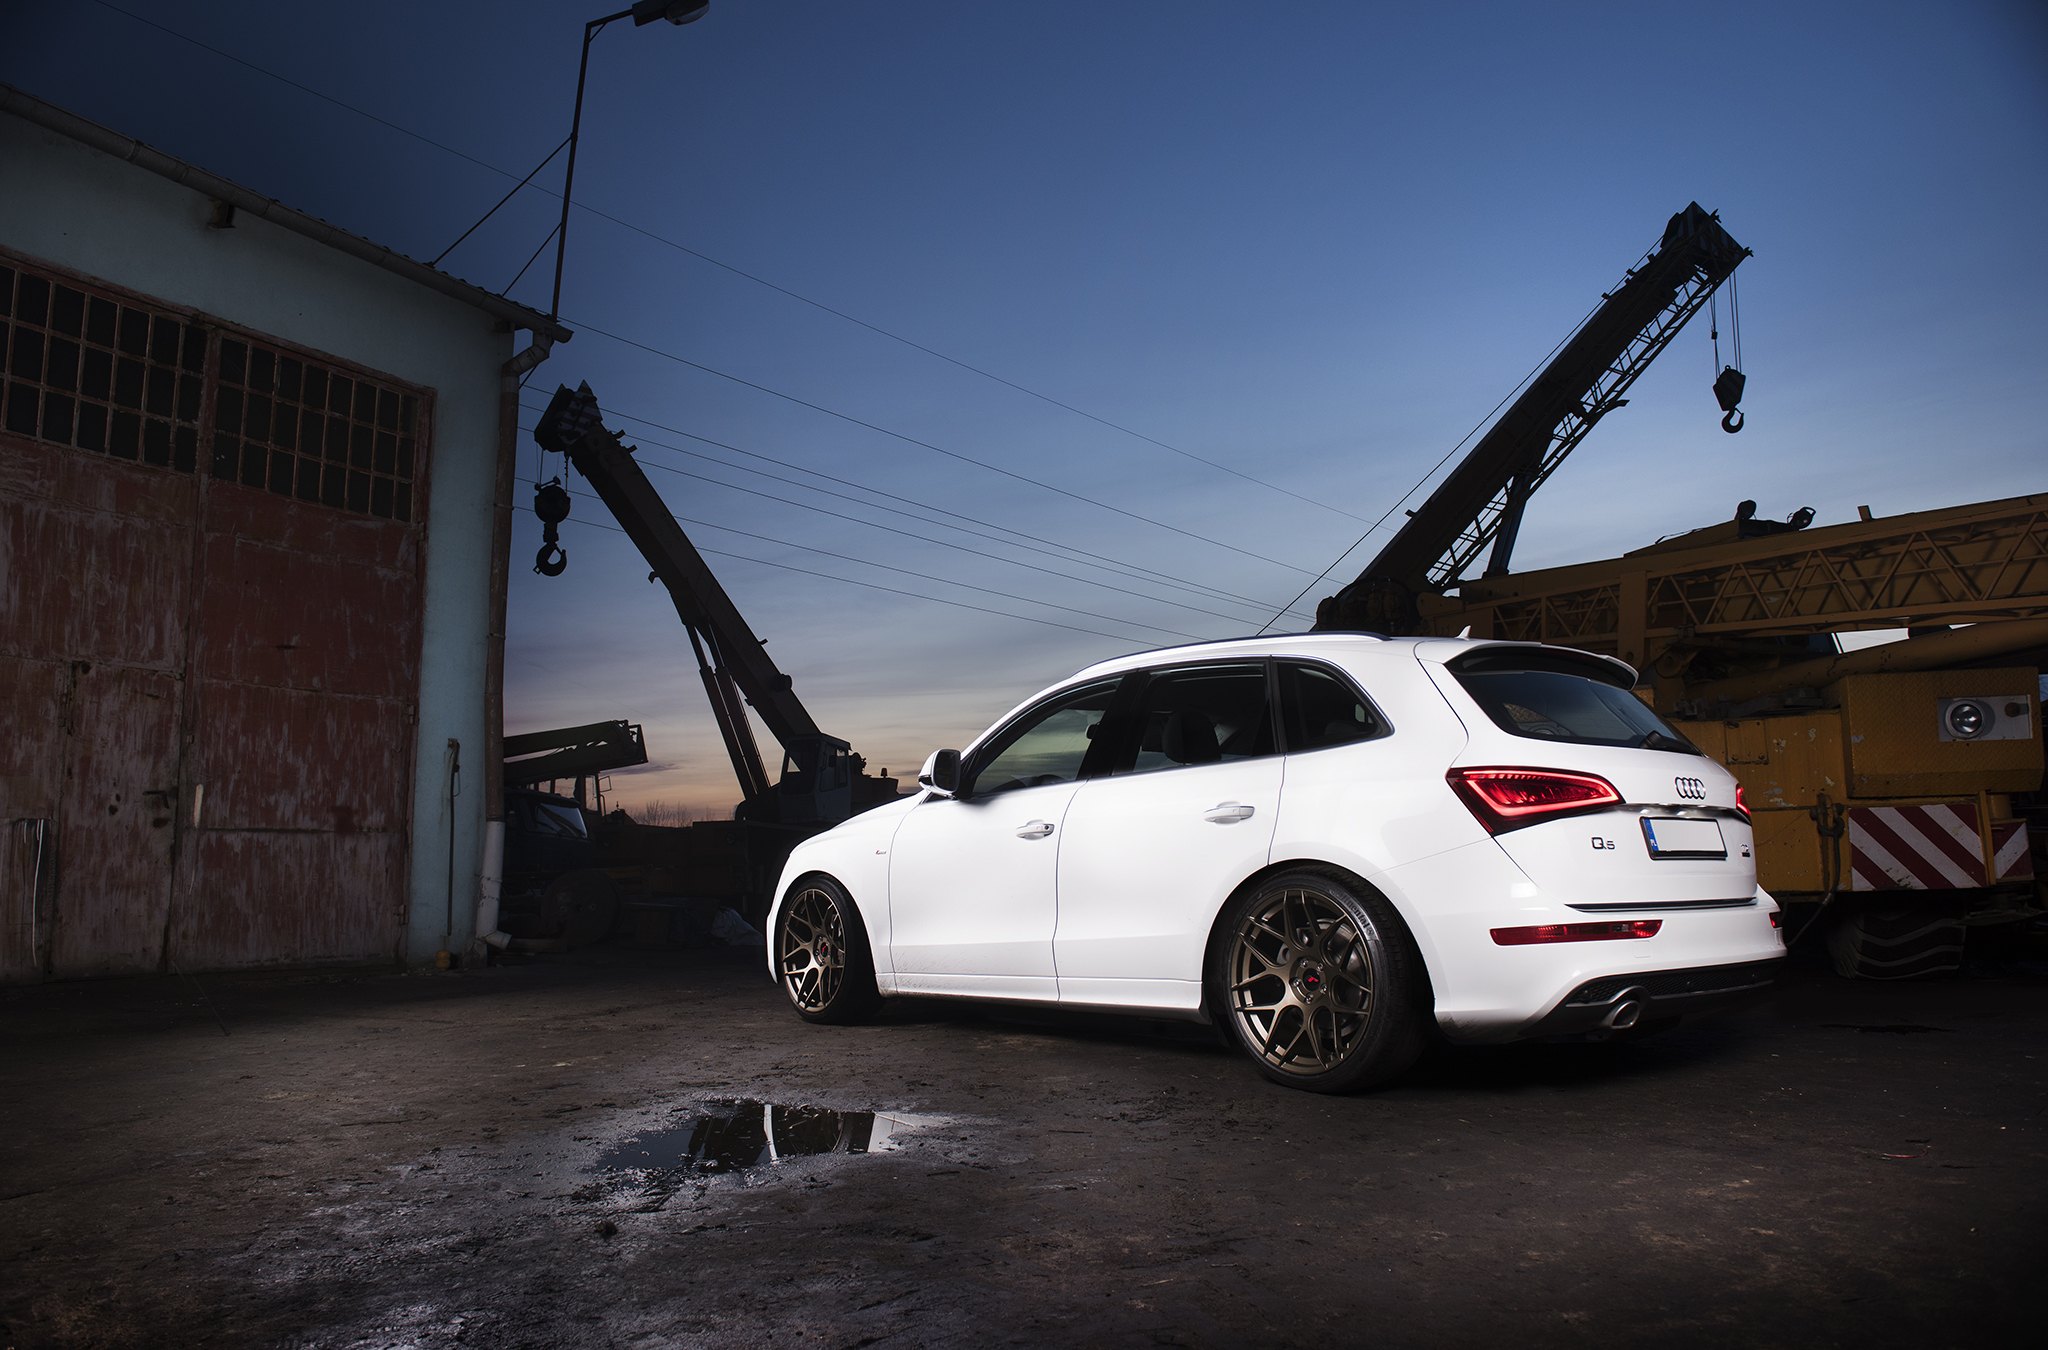 Aftermarket Rear Diffuser on White Audi Q5 - Photo by JR Wheels